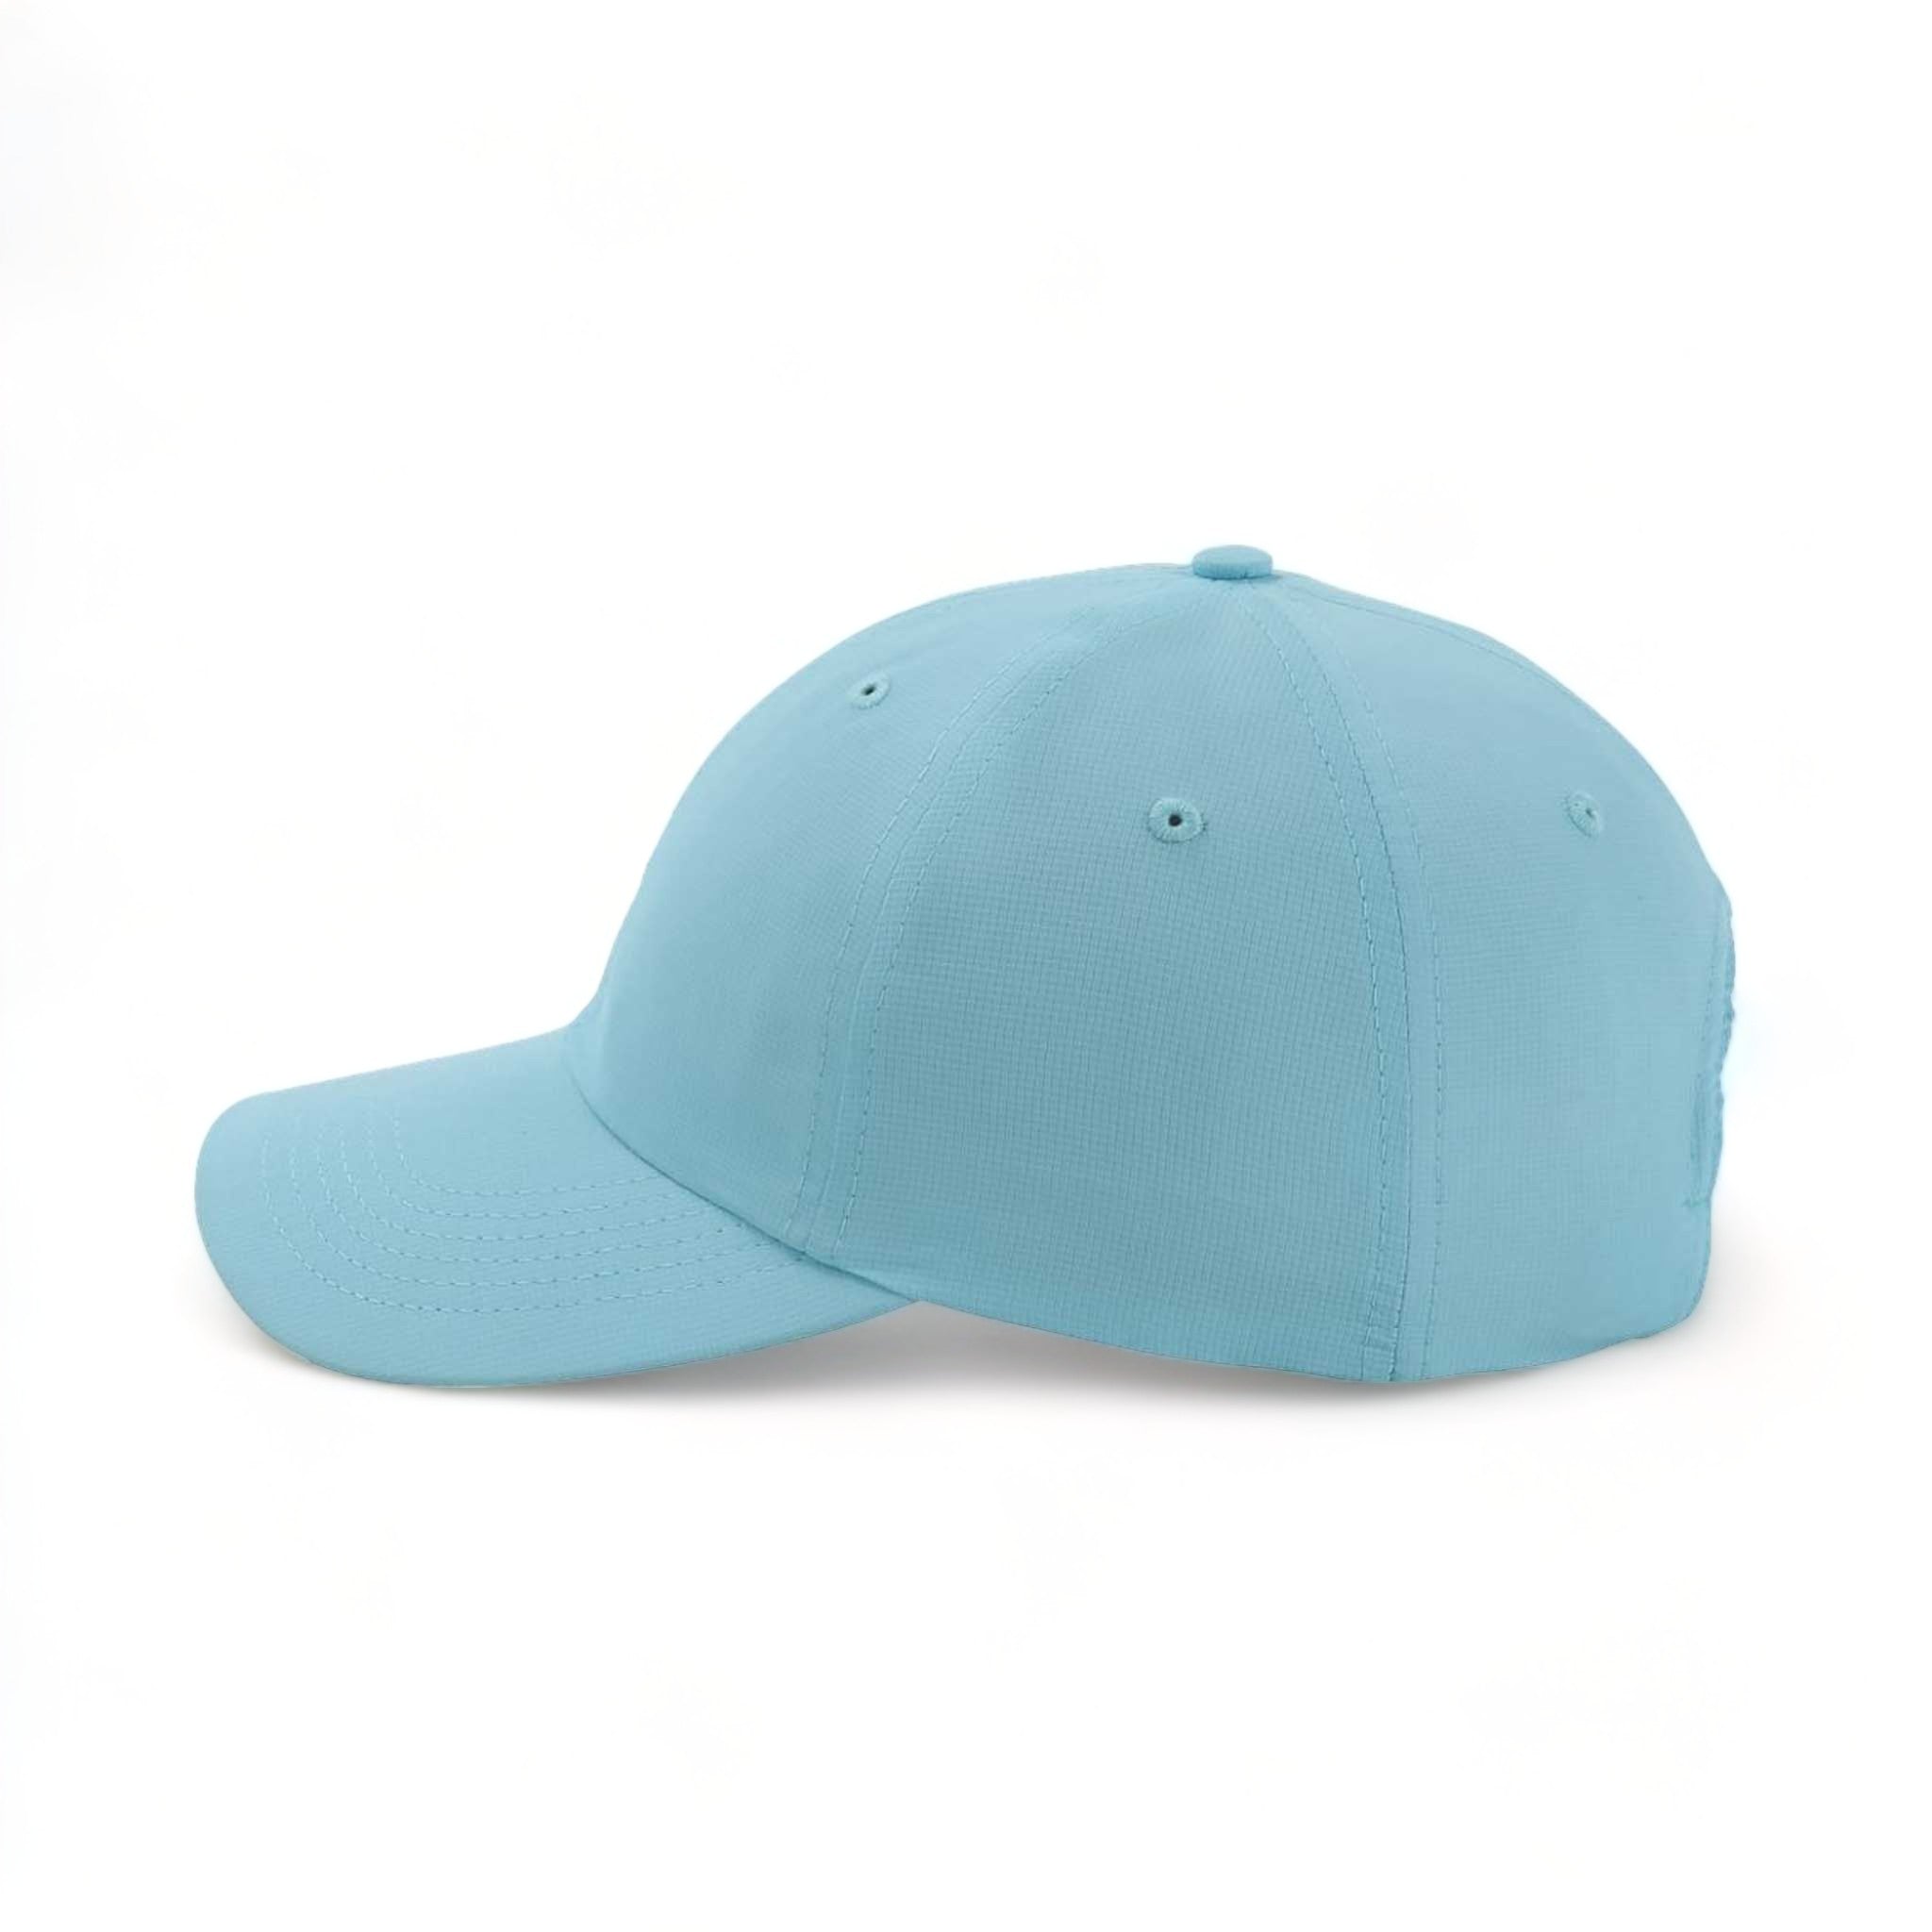 Side view of Imperial X210P custom hat in light blue